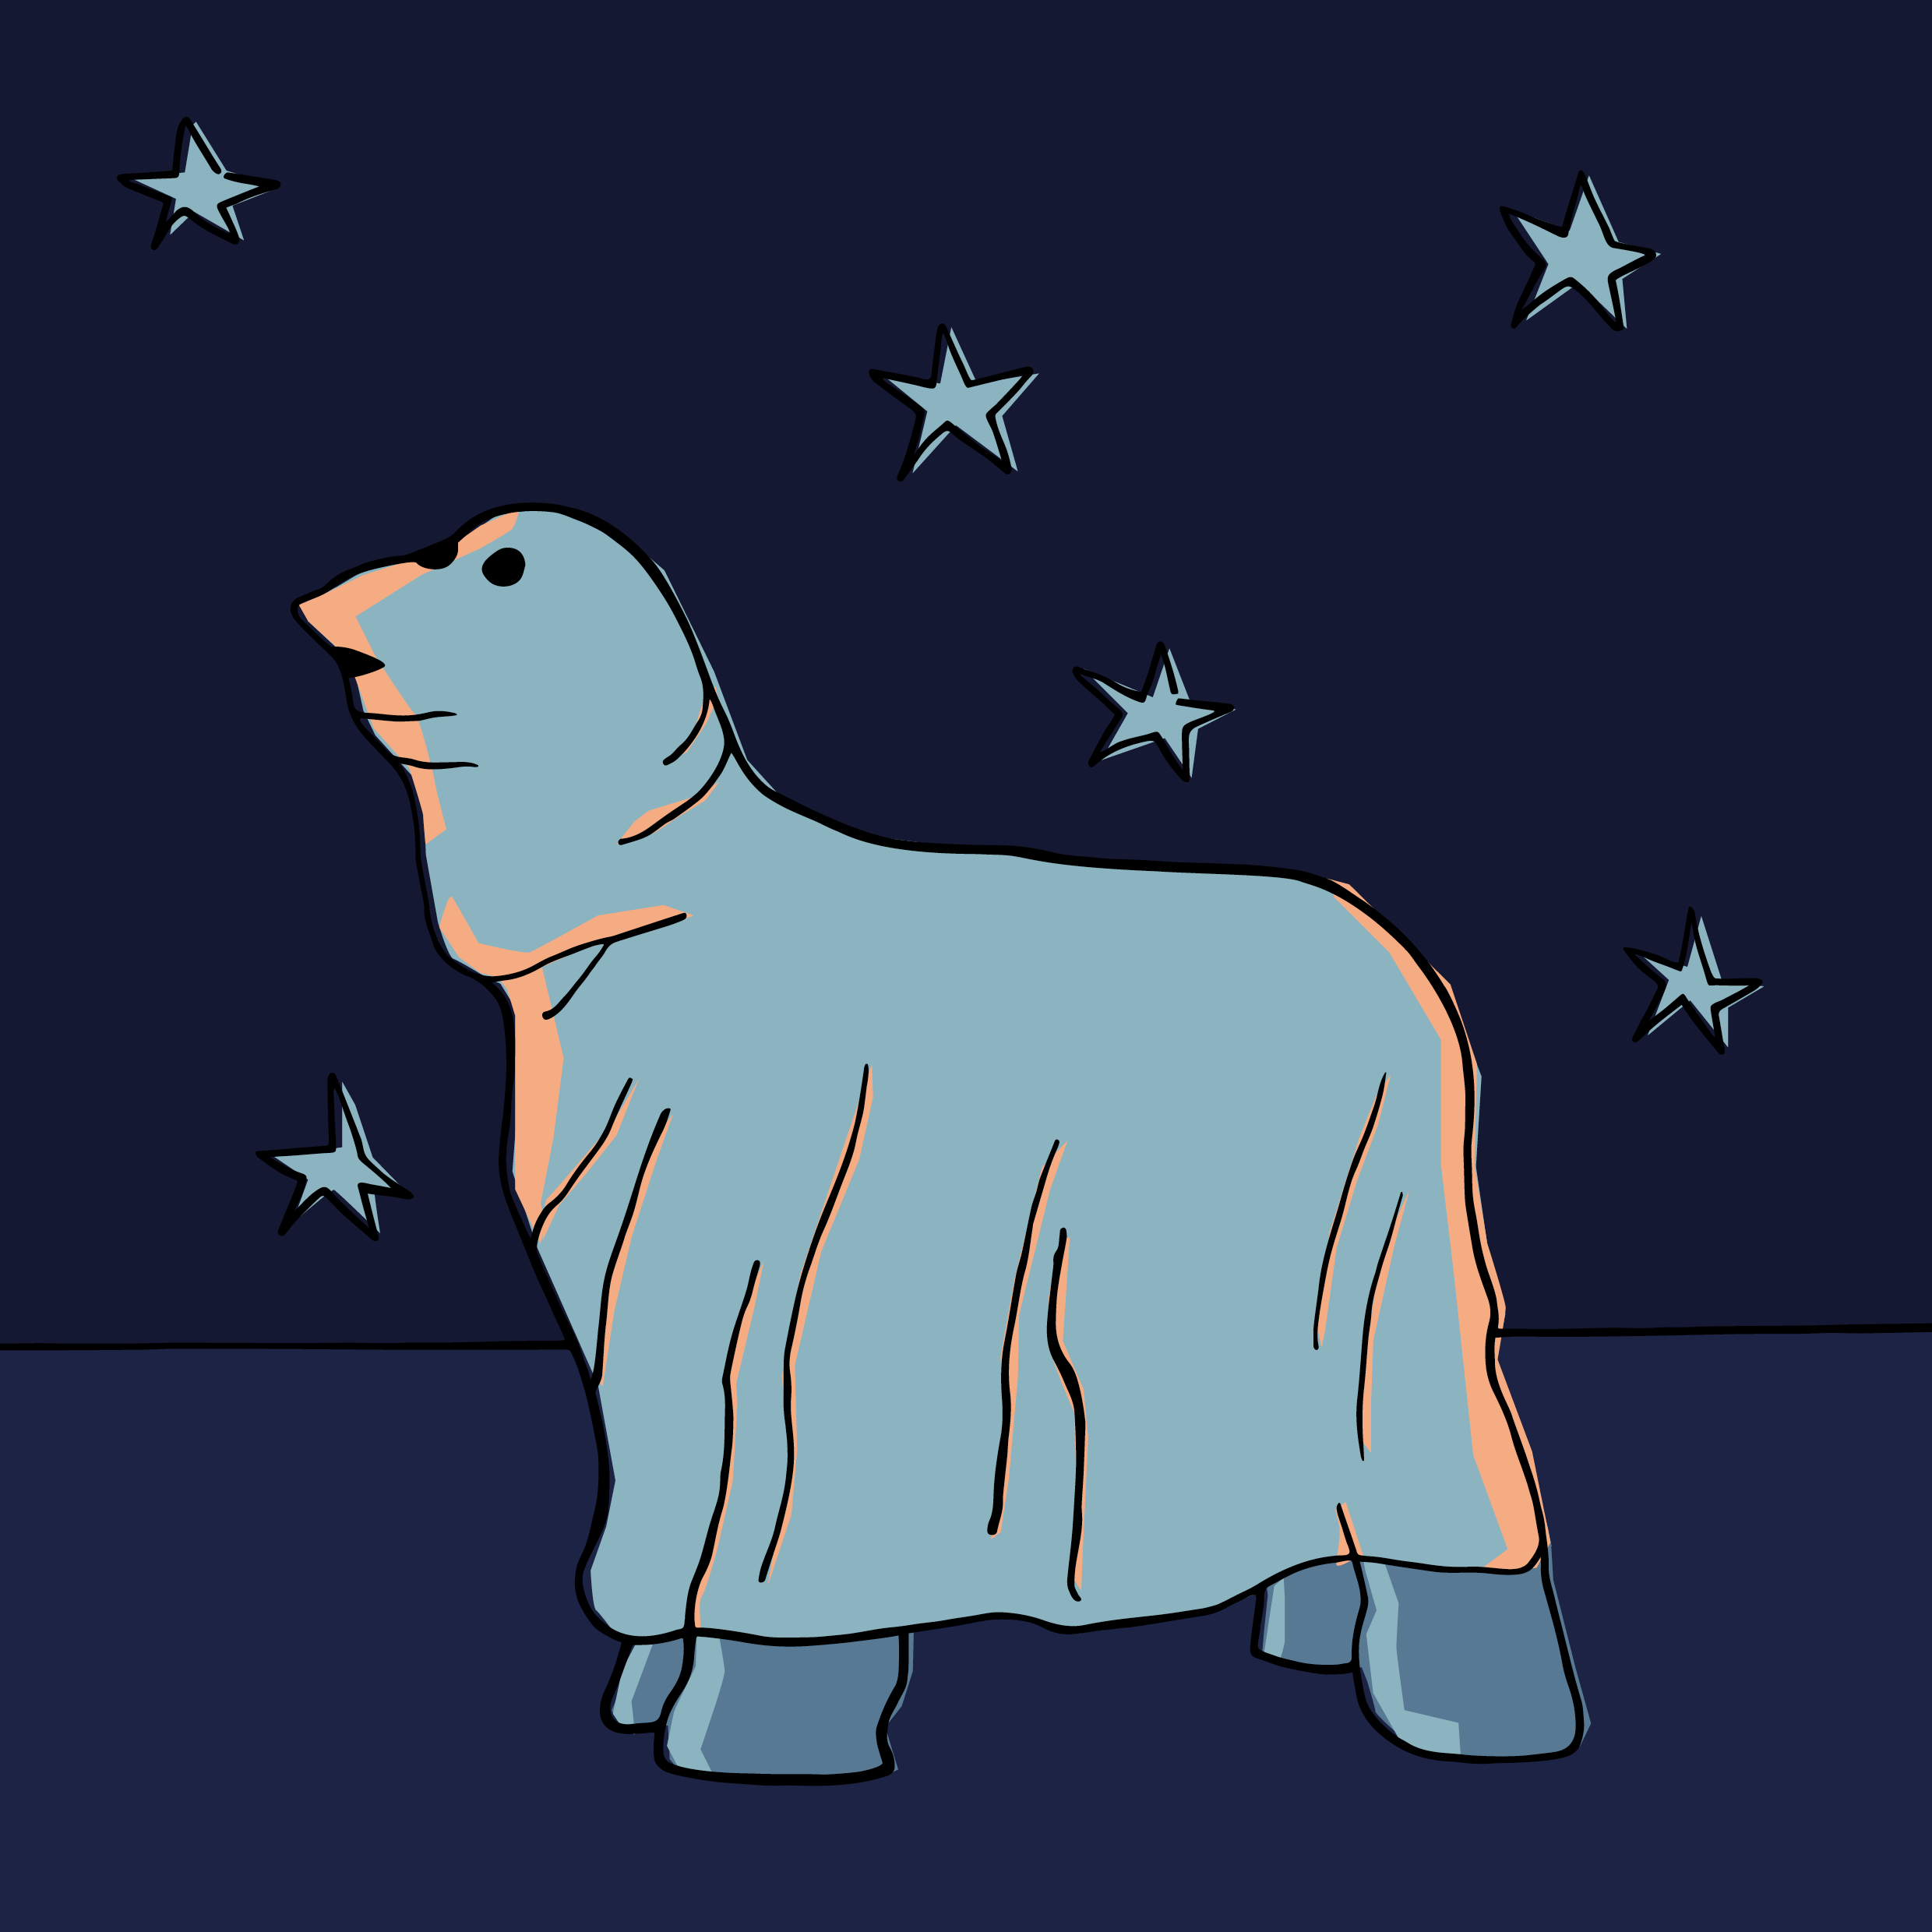 dogs-in-costumes-illustration-series-drawing-helene-uhl.png